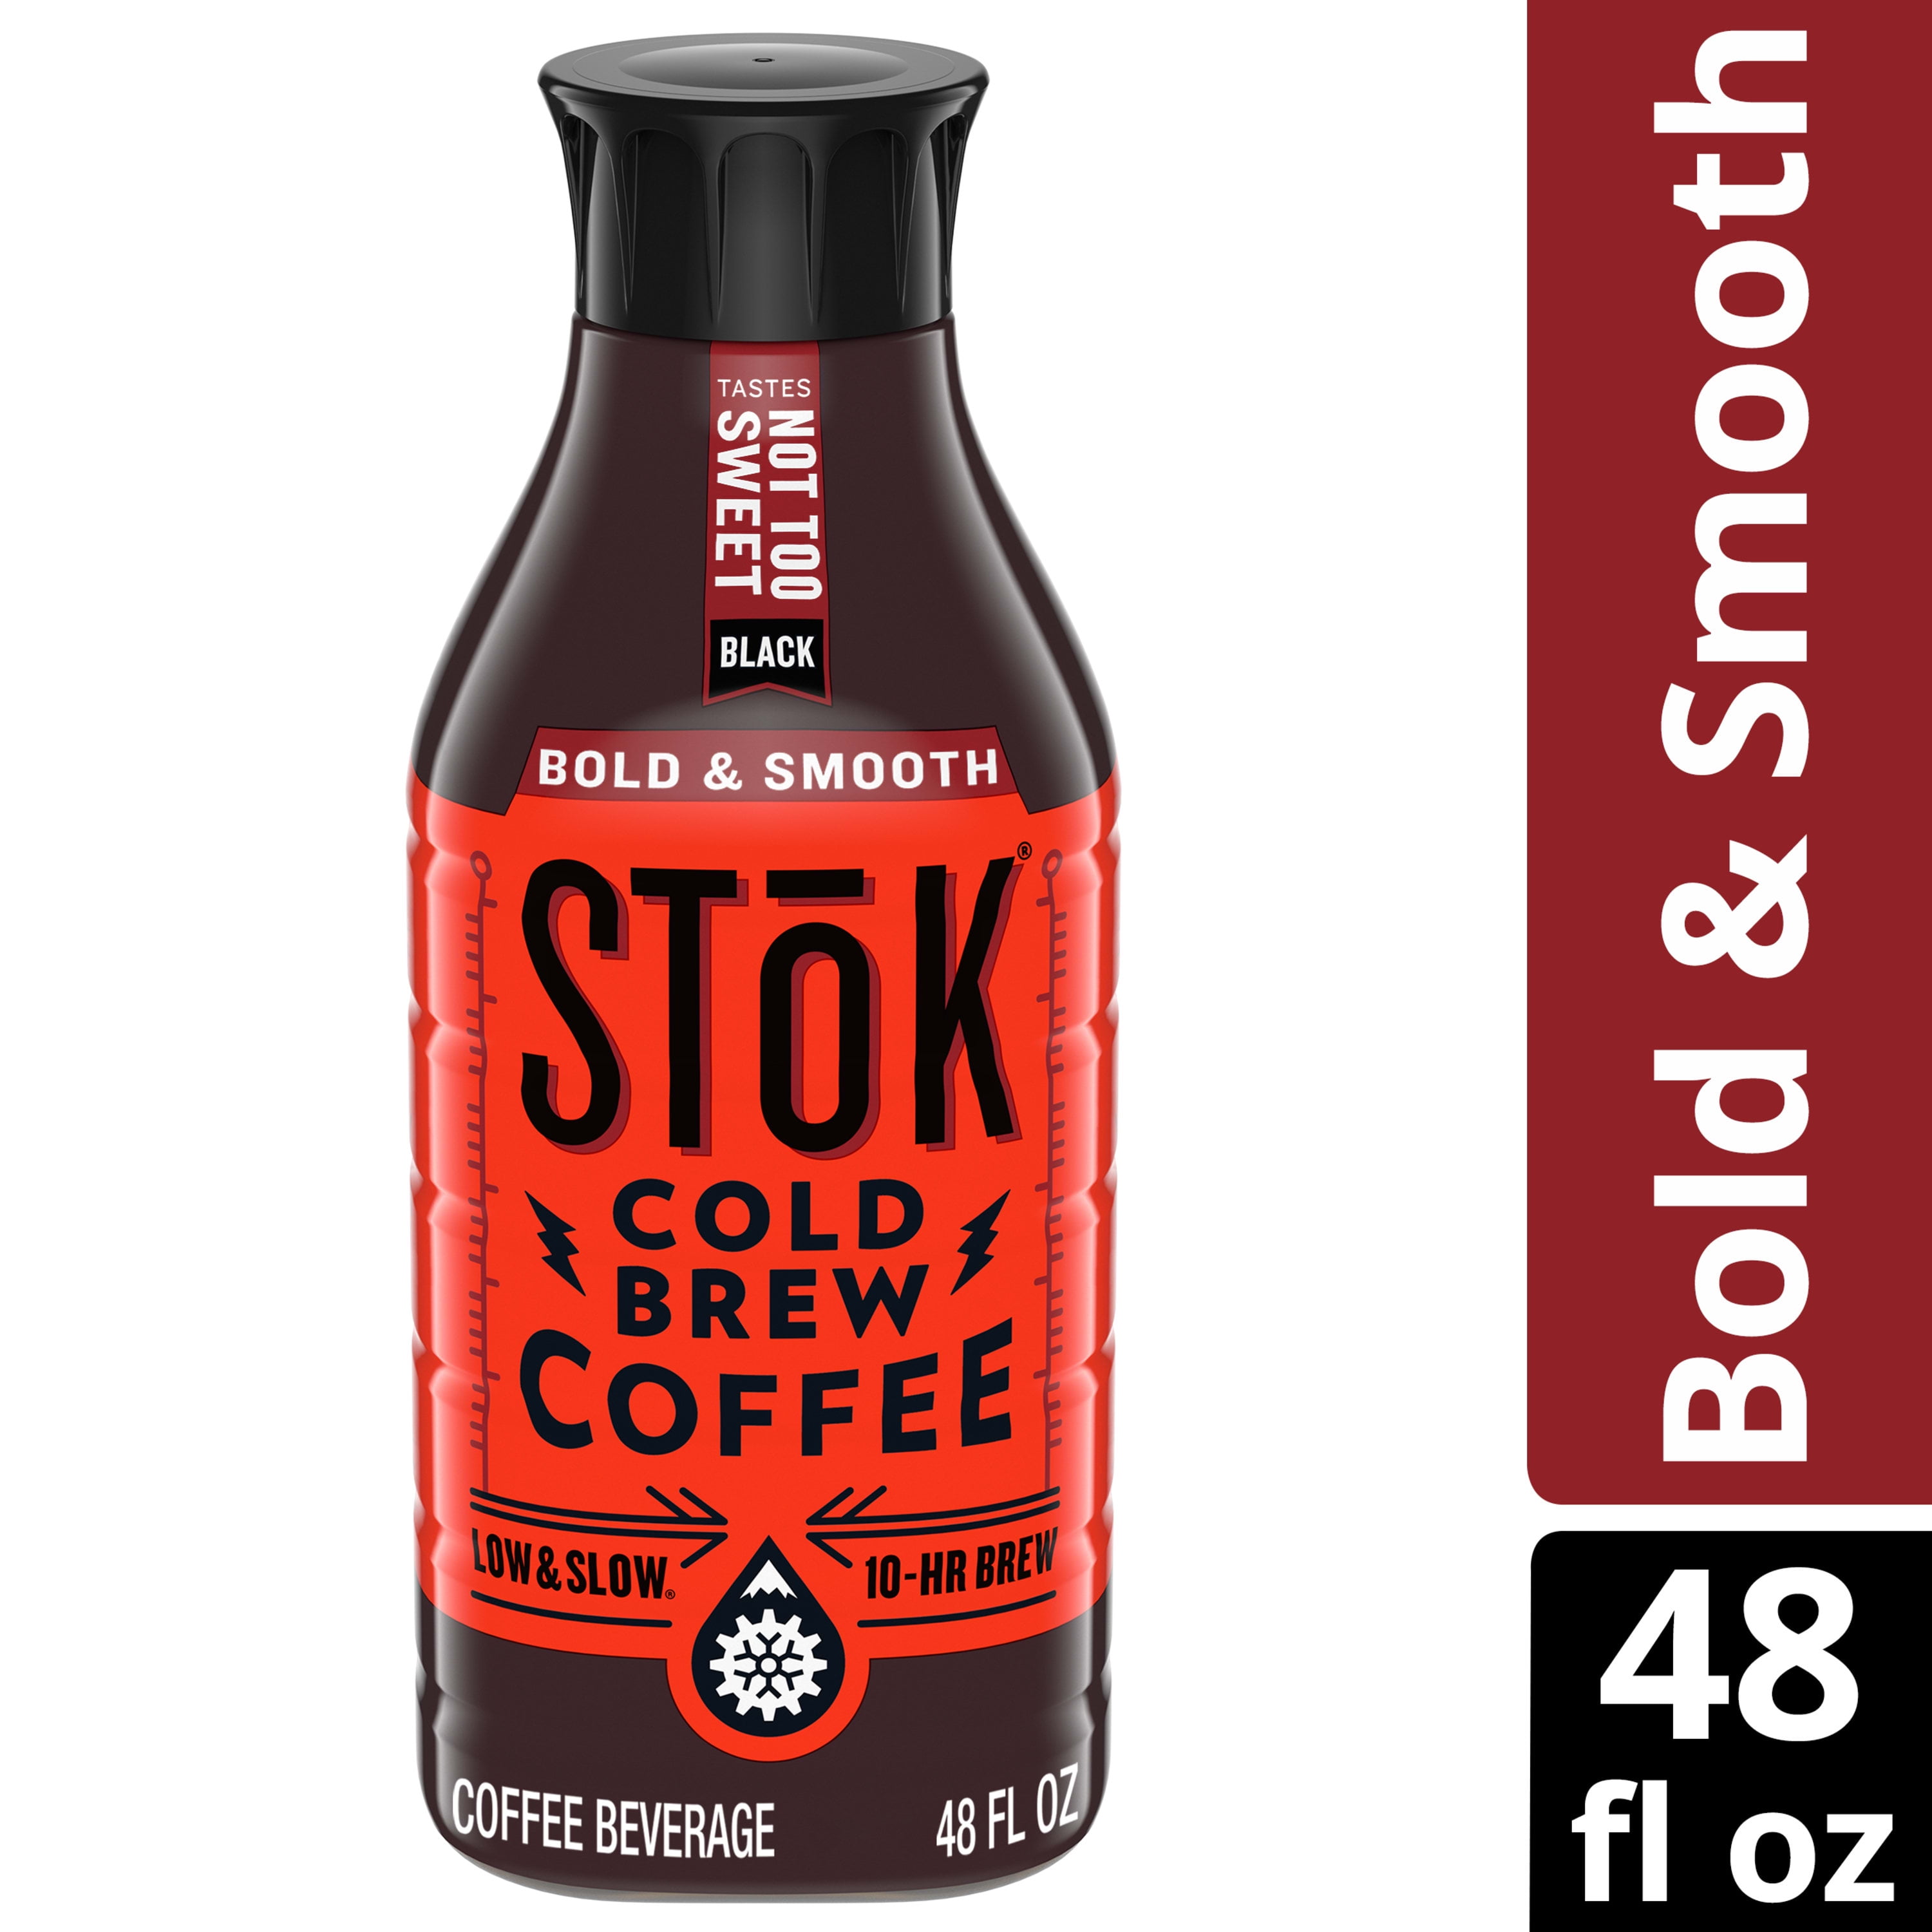 SToK Cold Brew Coffee 48oz. Bottles (2 pack) (Not Too Sweet)